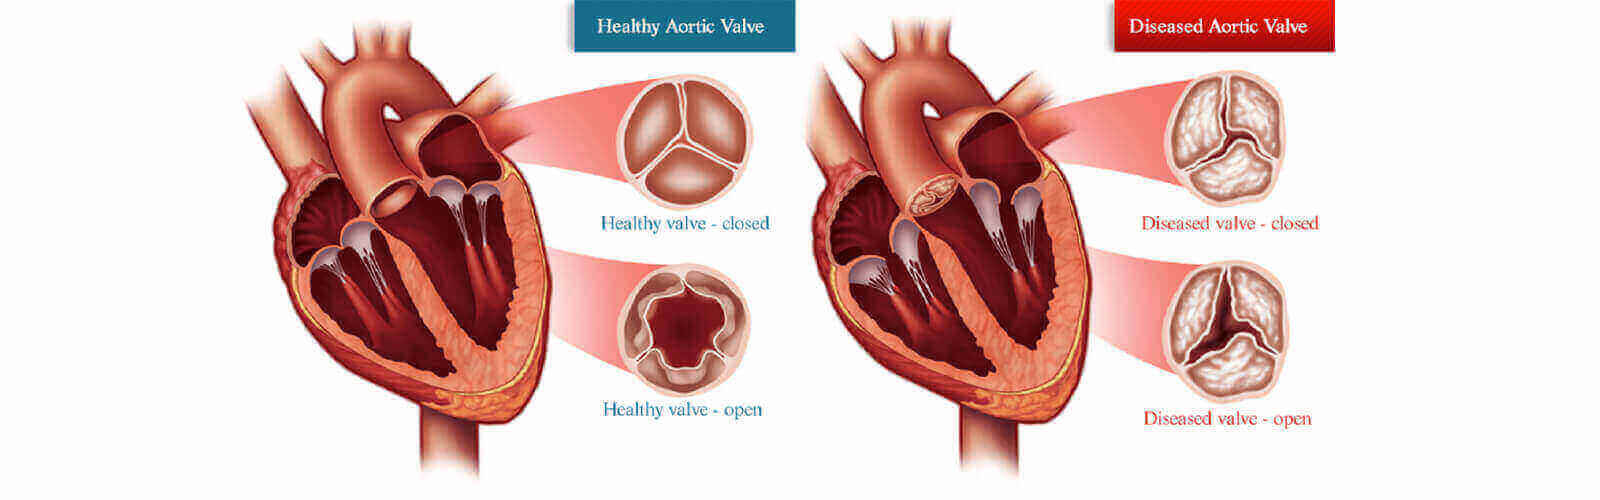 Heart Valve Replacement Surgery in Dominican Republic